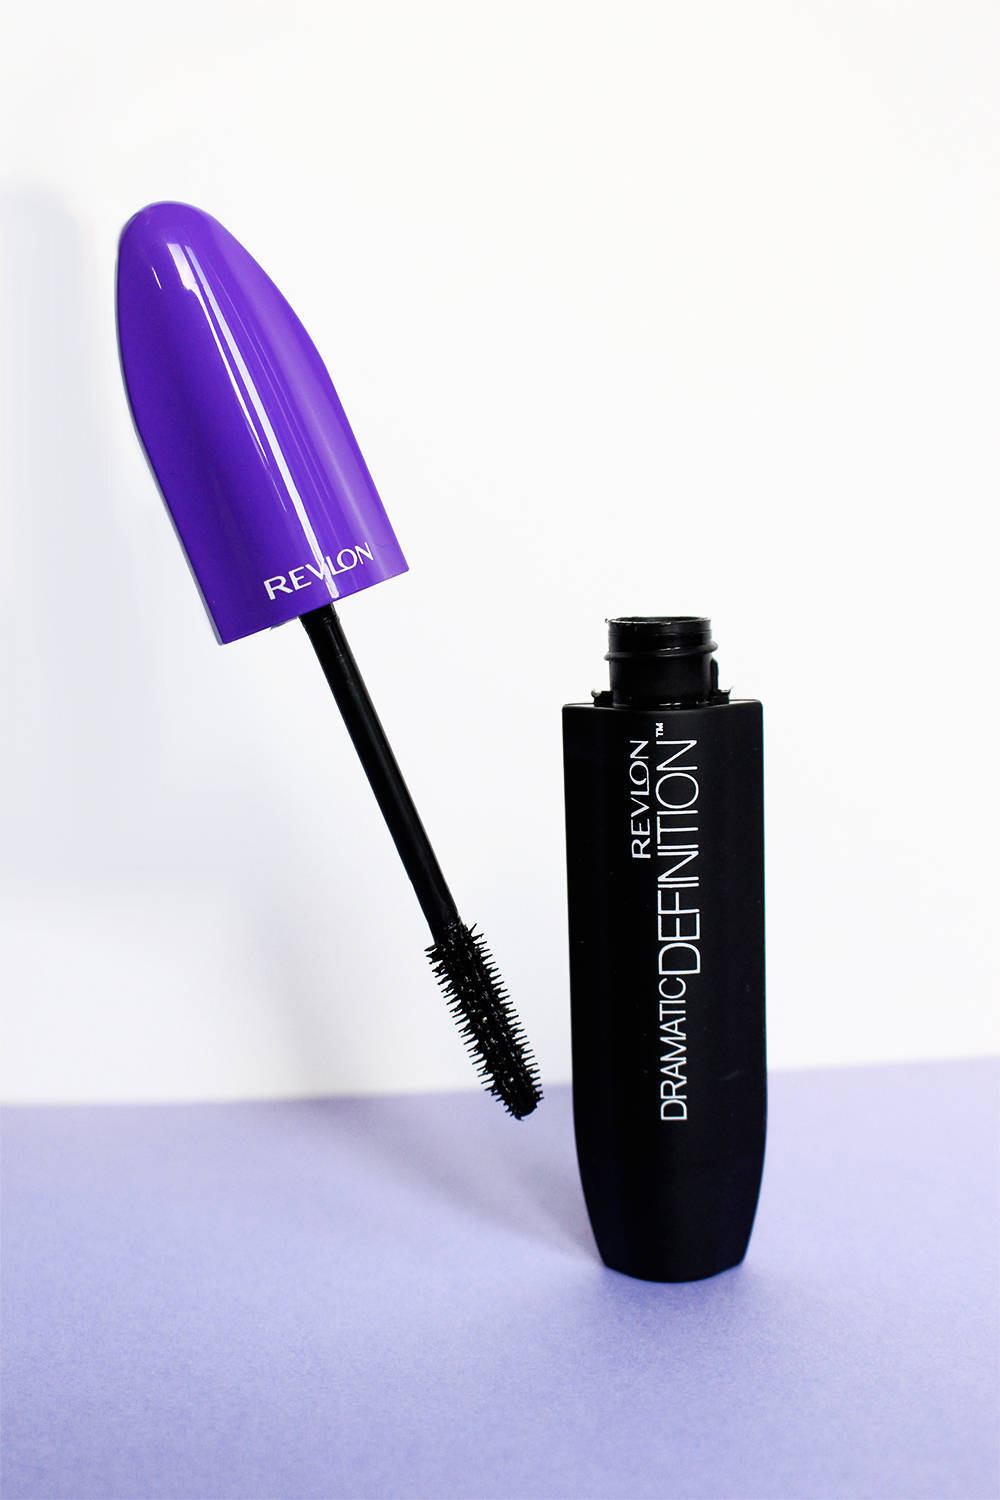 New Revlon Decoded Mascara Collection 2016